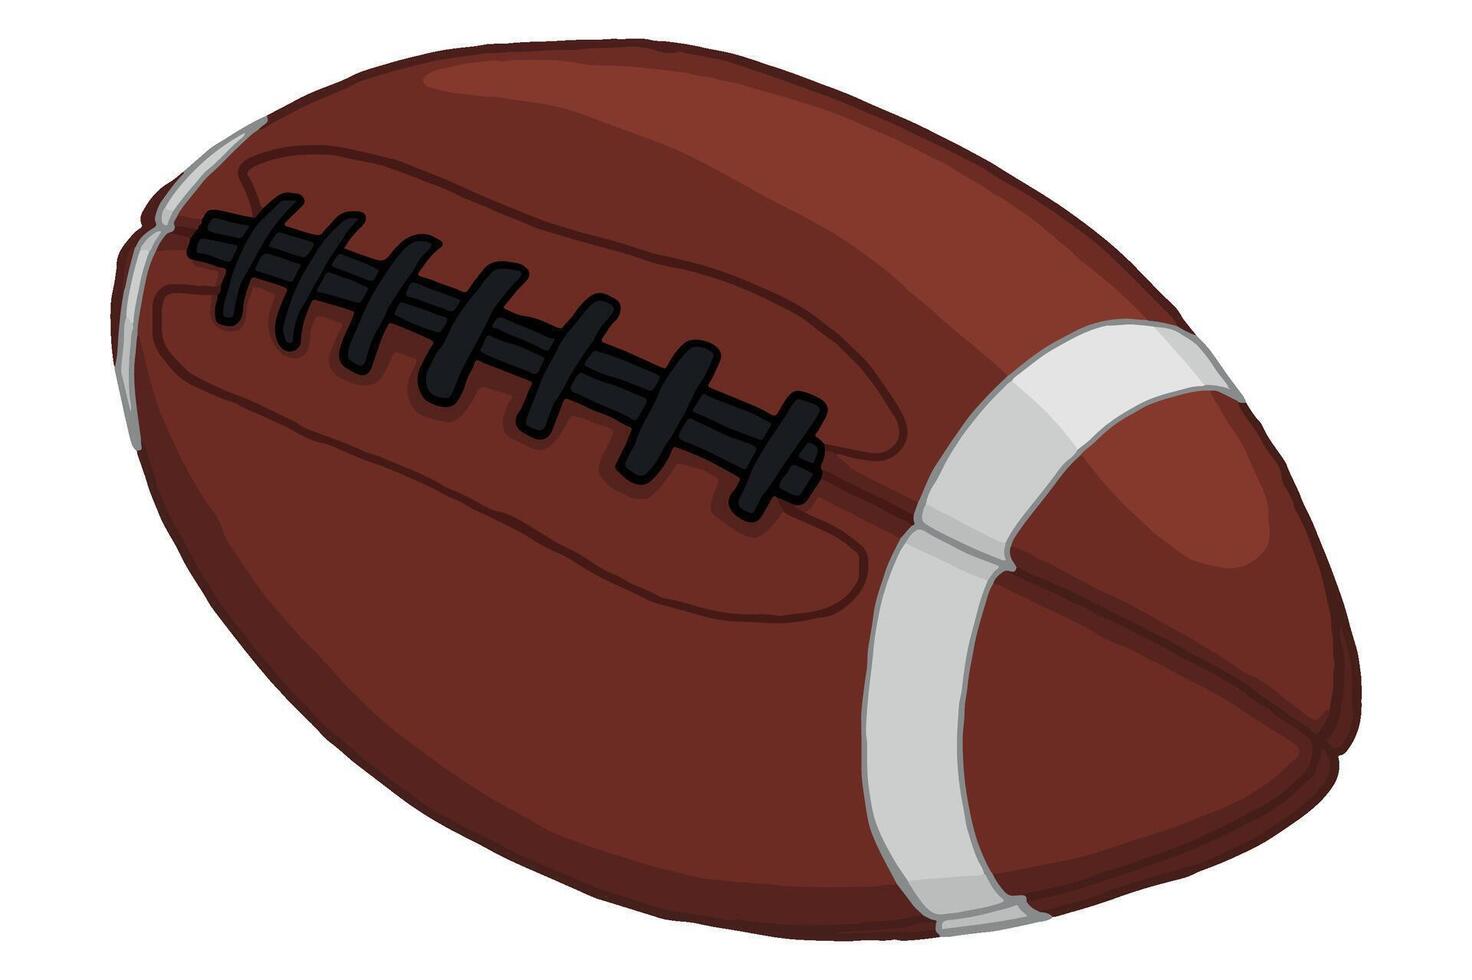 Sport - Rugby Ball - American Football vector